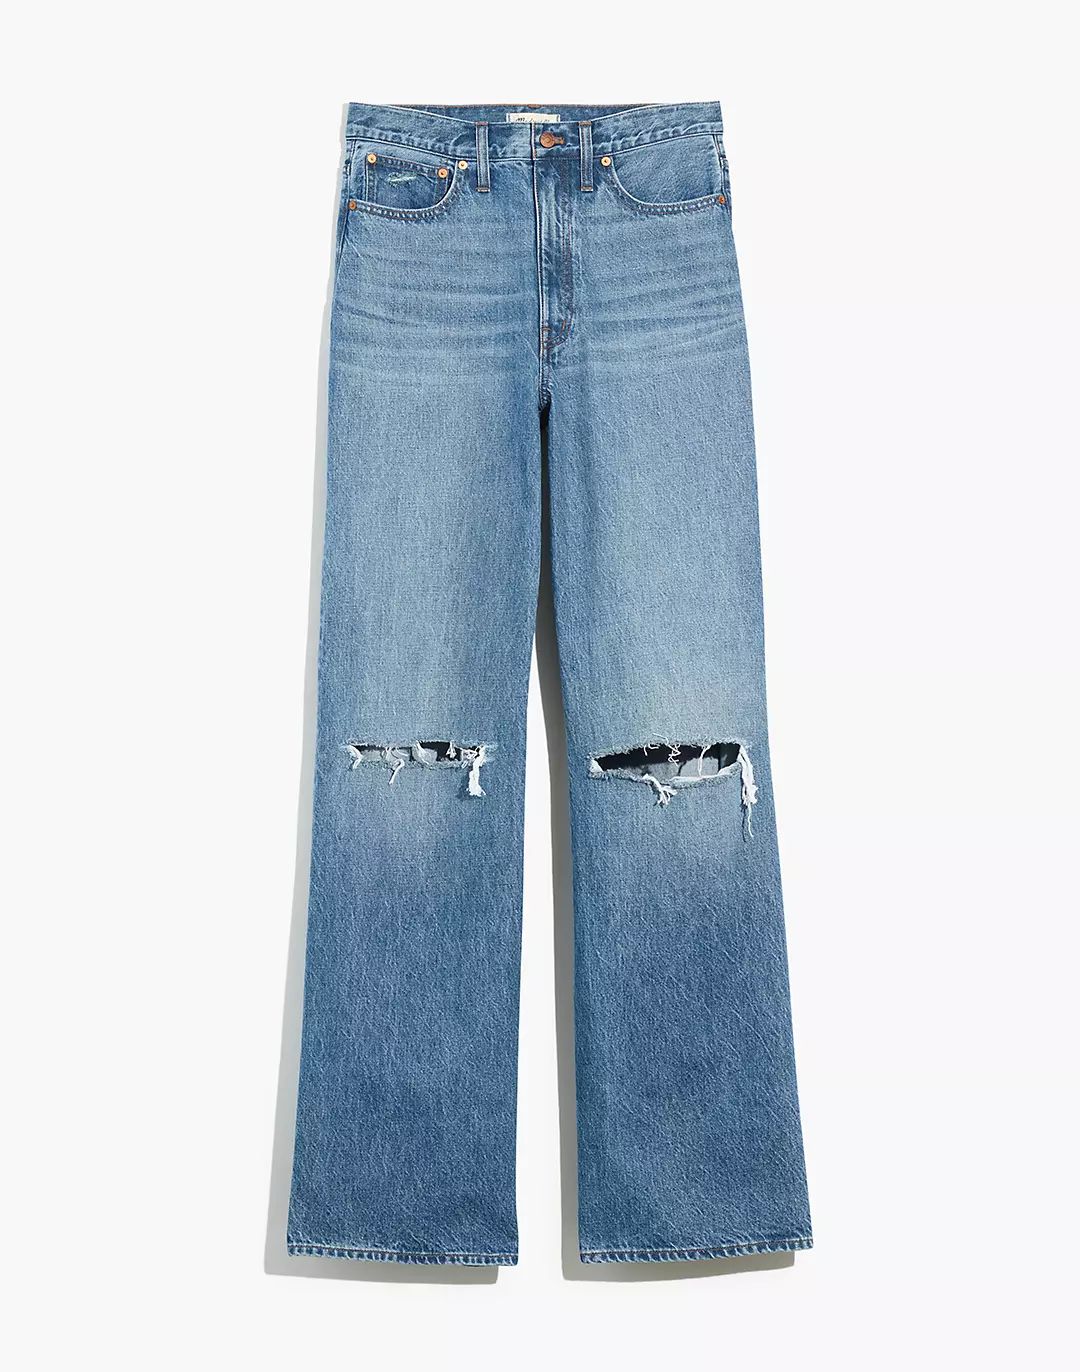 Superwide-Leg Jeans in Amcliffe Wash: Knee-Rip Edition | Madewell